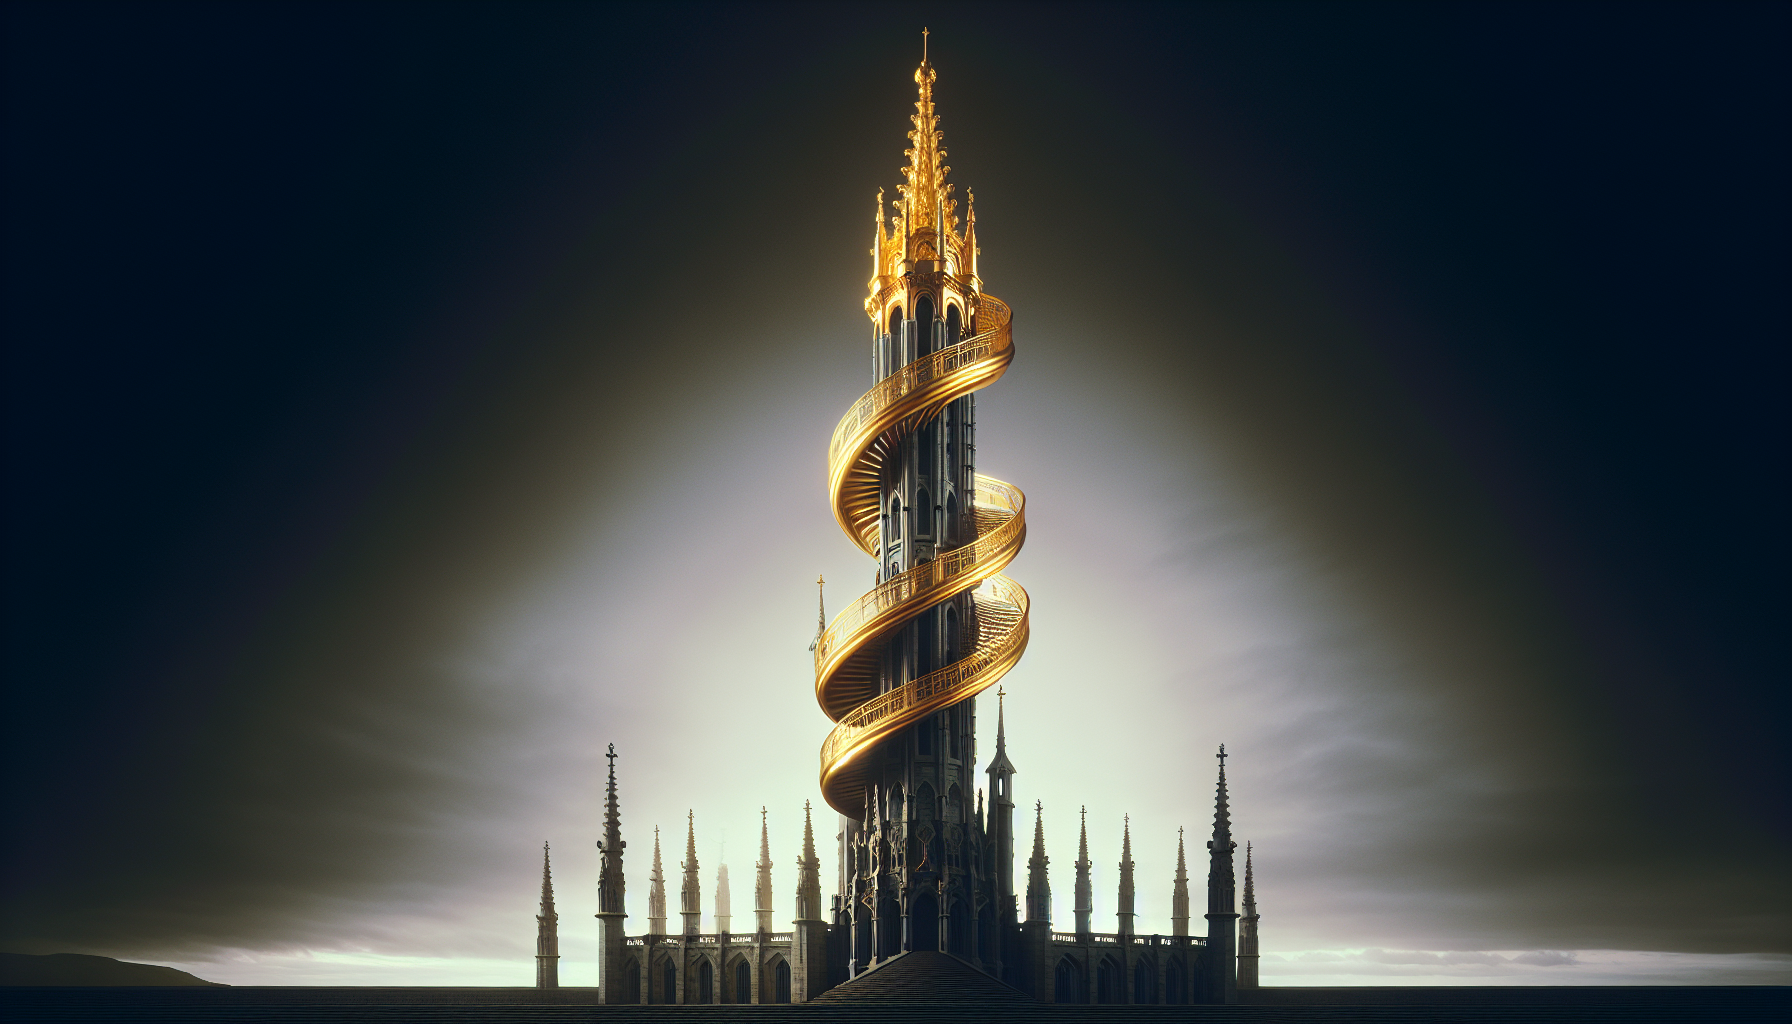 What’s The Purpose Of A Spire?